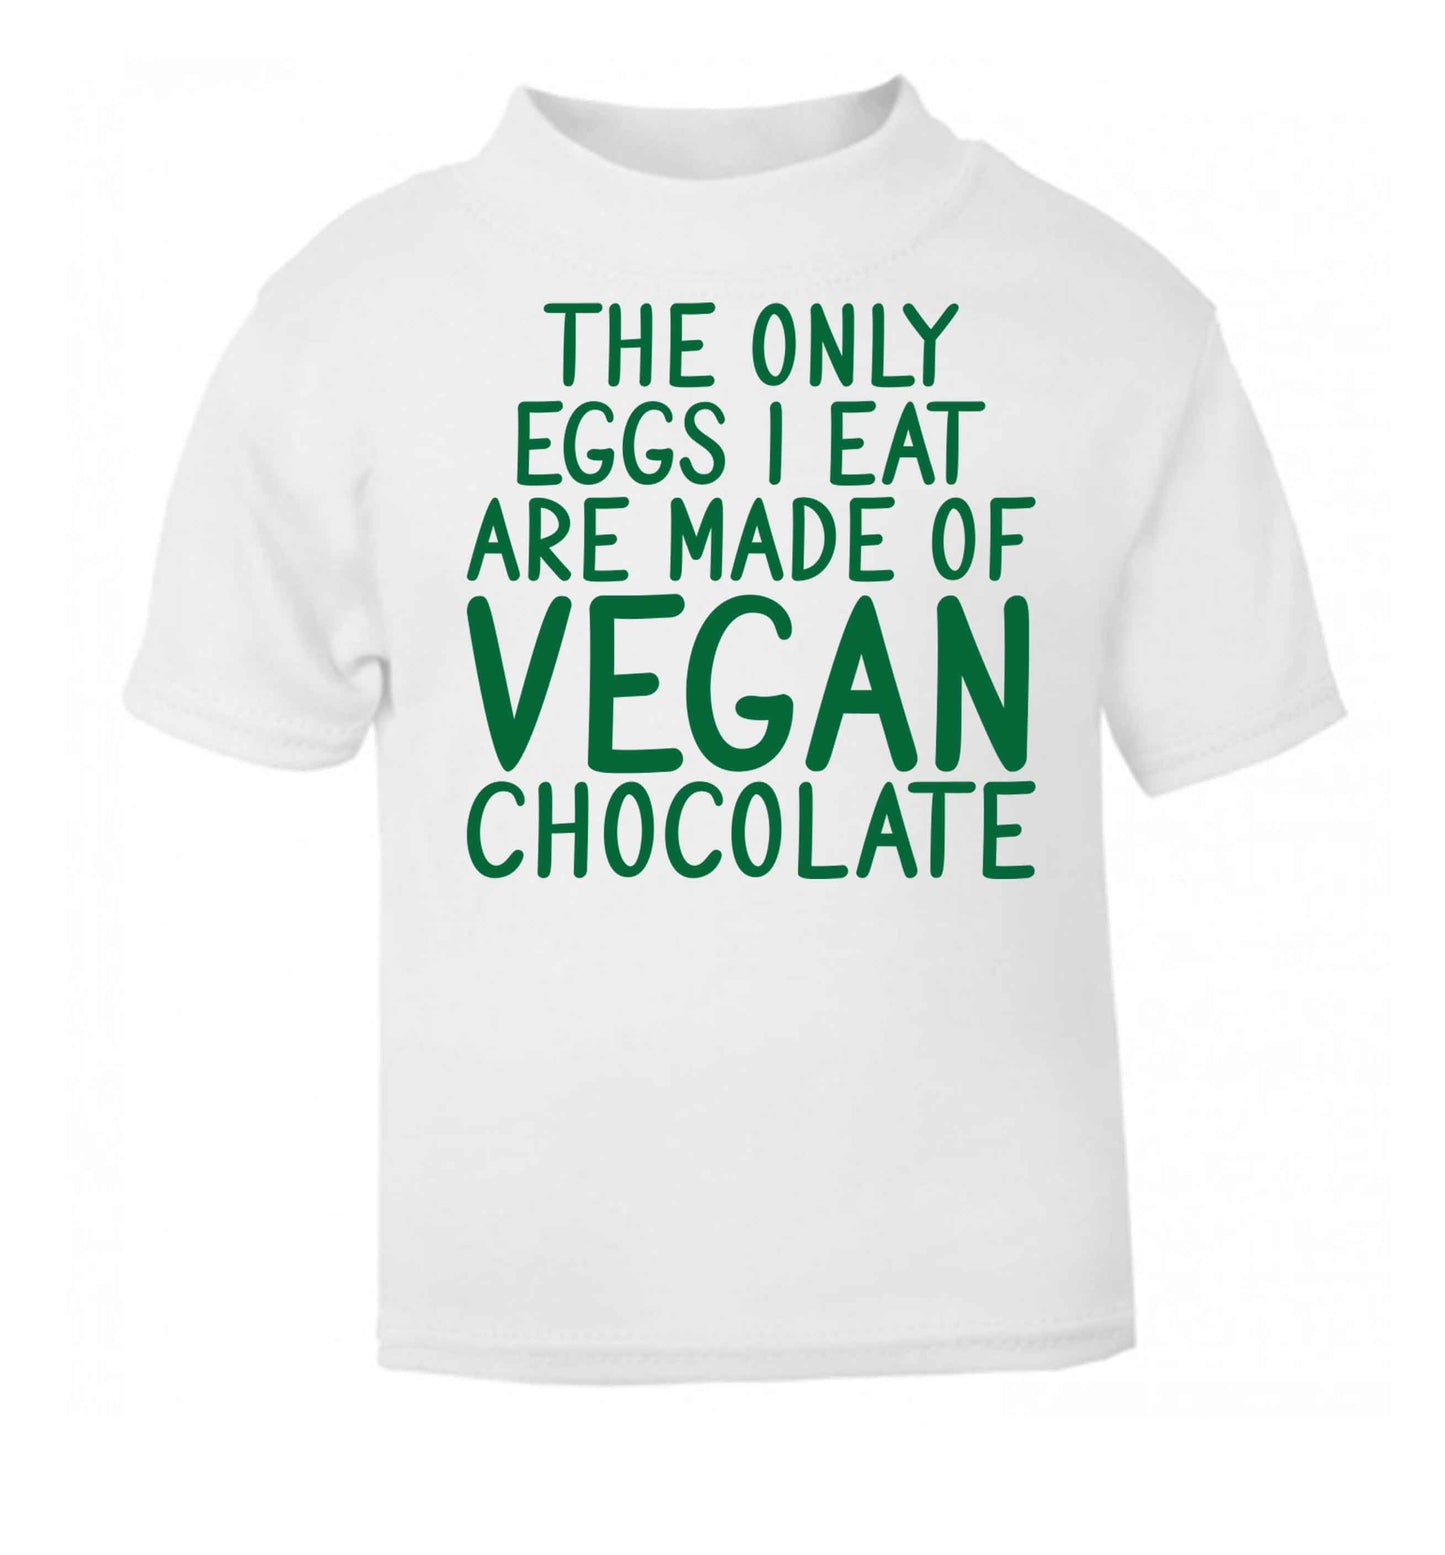 The only eggs I eat are made of vegan chocolate white baby toddler Tshirt 2 Years